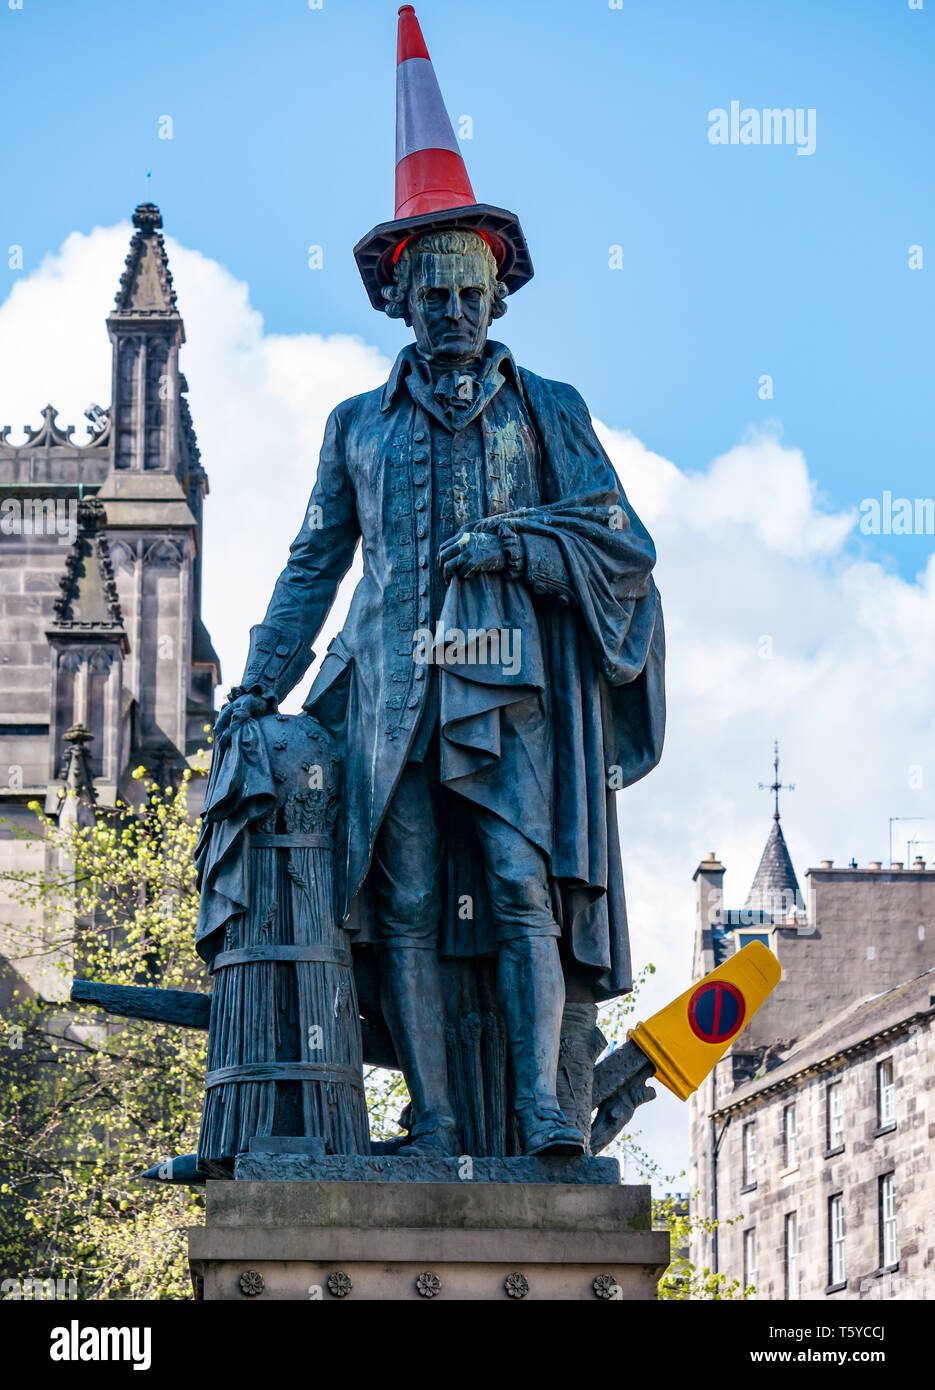 Royal Mile, Edinburgh, Scotland, United Kingdom, 27th April 2019.  Revellers decorate the Adam Smith statue with traffic cones in the Spring sunshine as he looks down on the tourists passing by Stock Photo